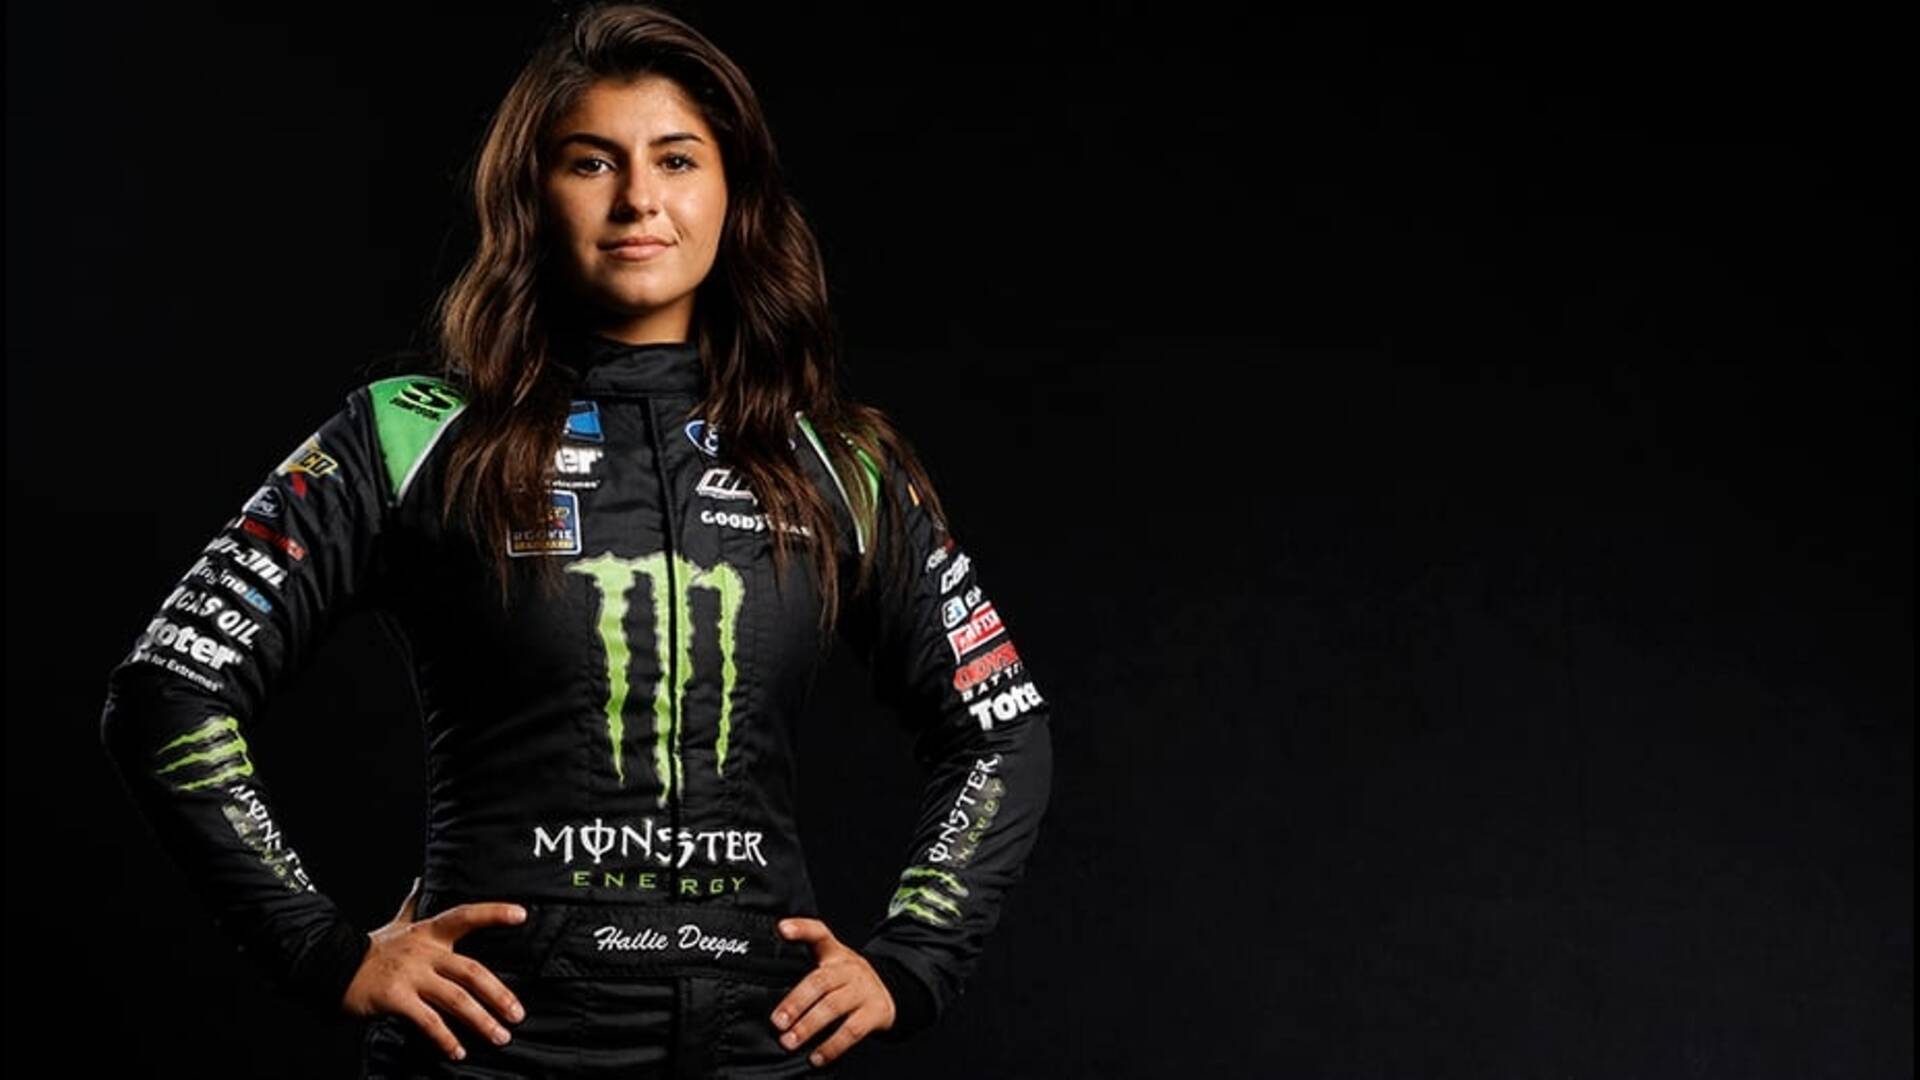 andrew greg recommends hailie deegan wallpaper pic